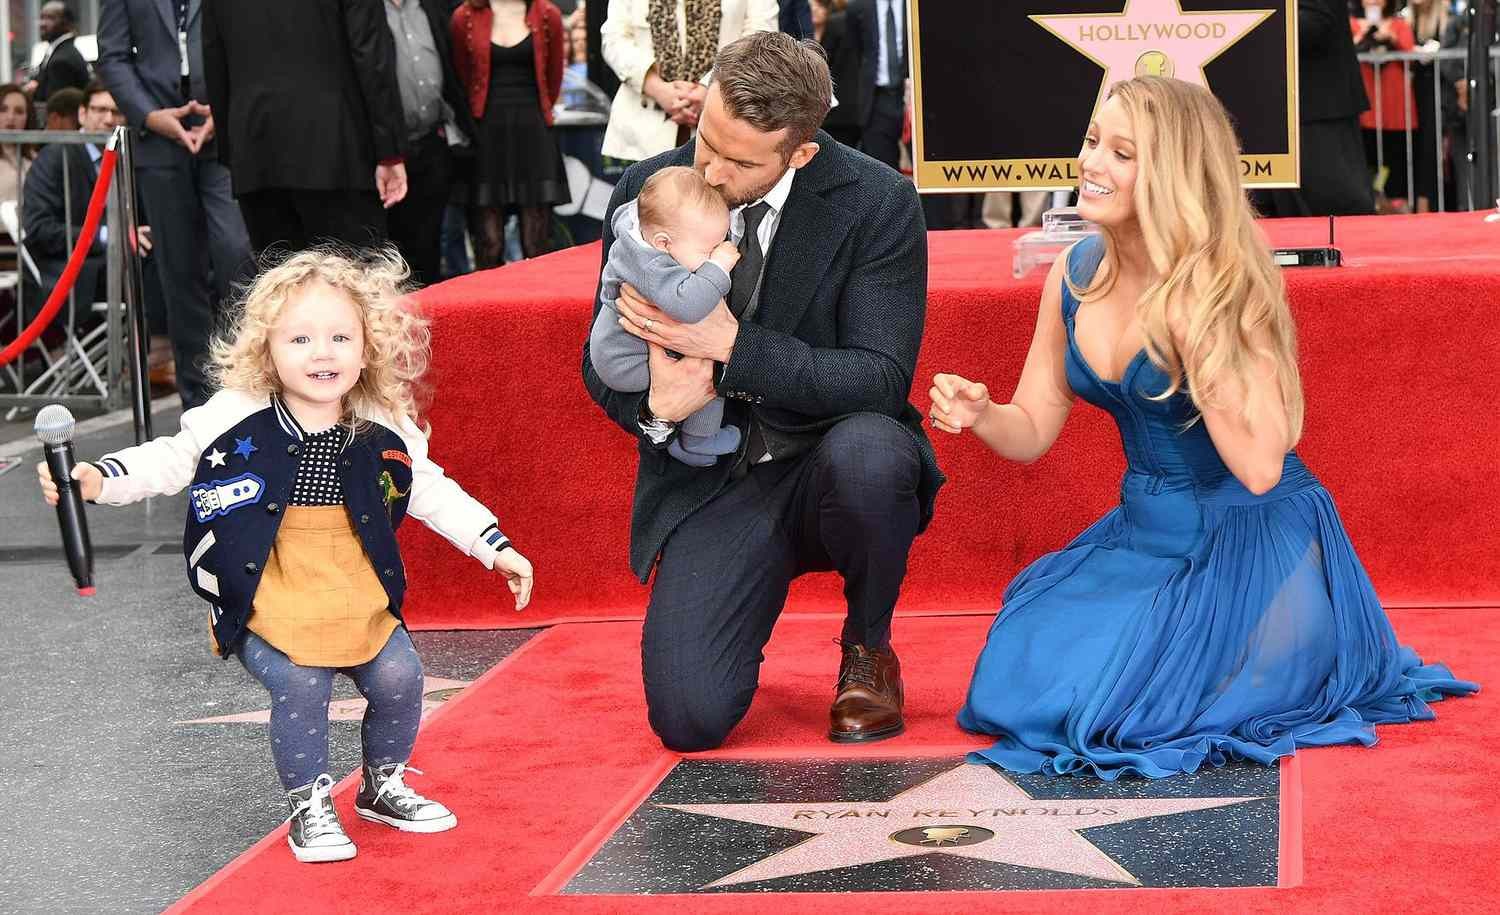 Ryan Reynolds with his family